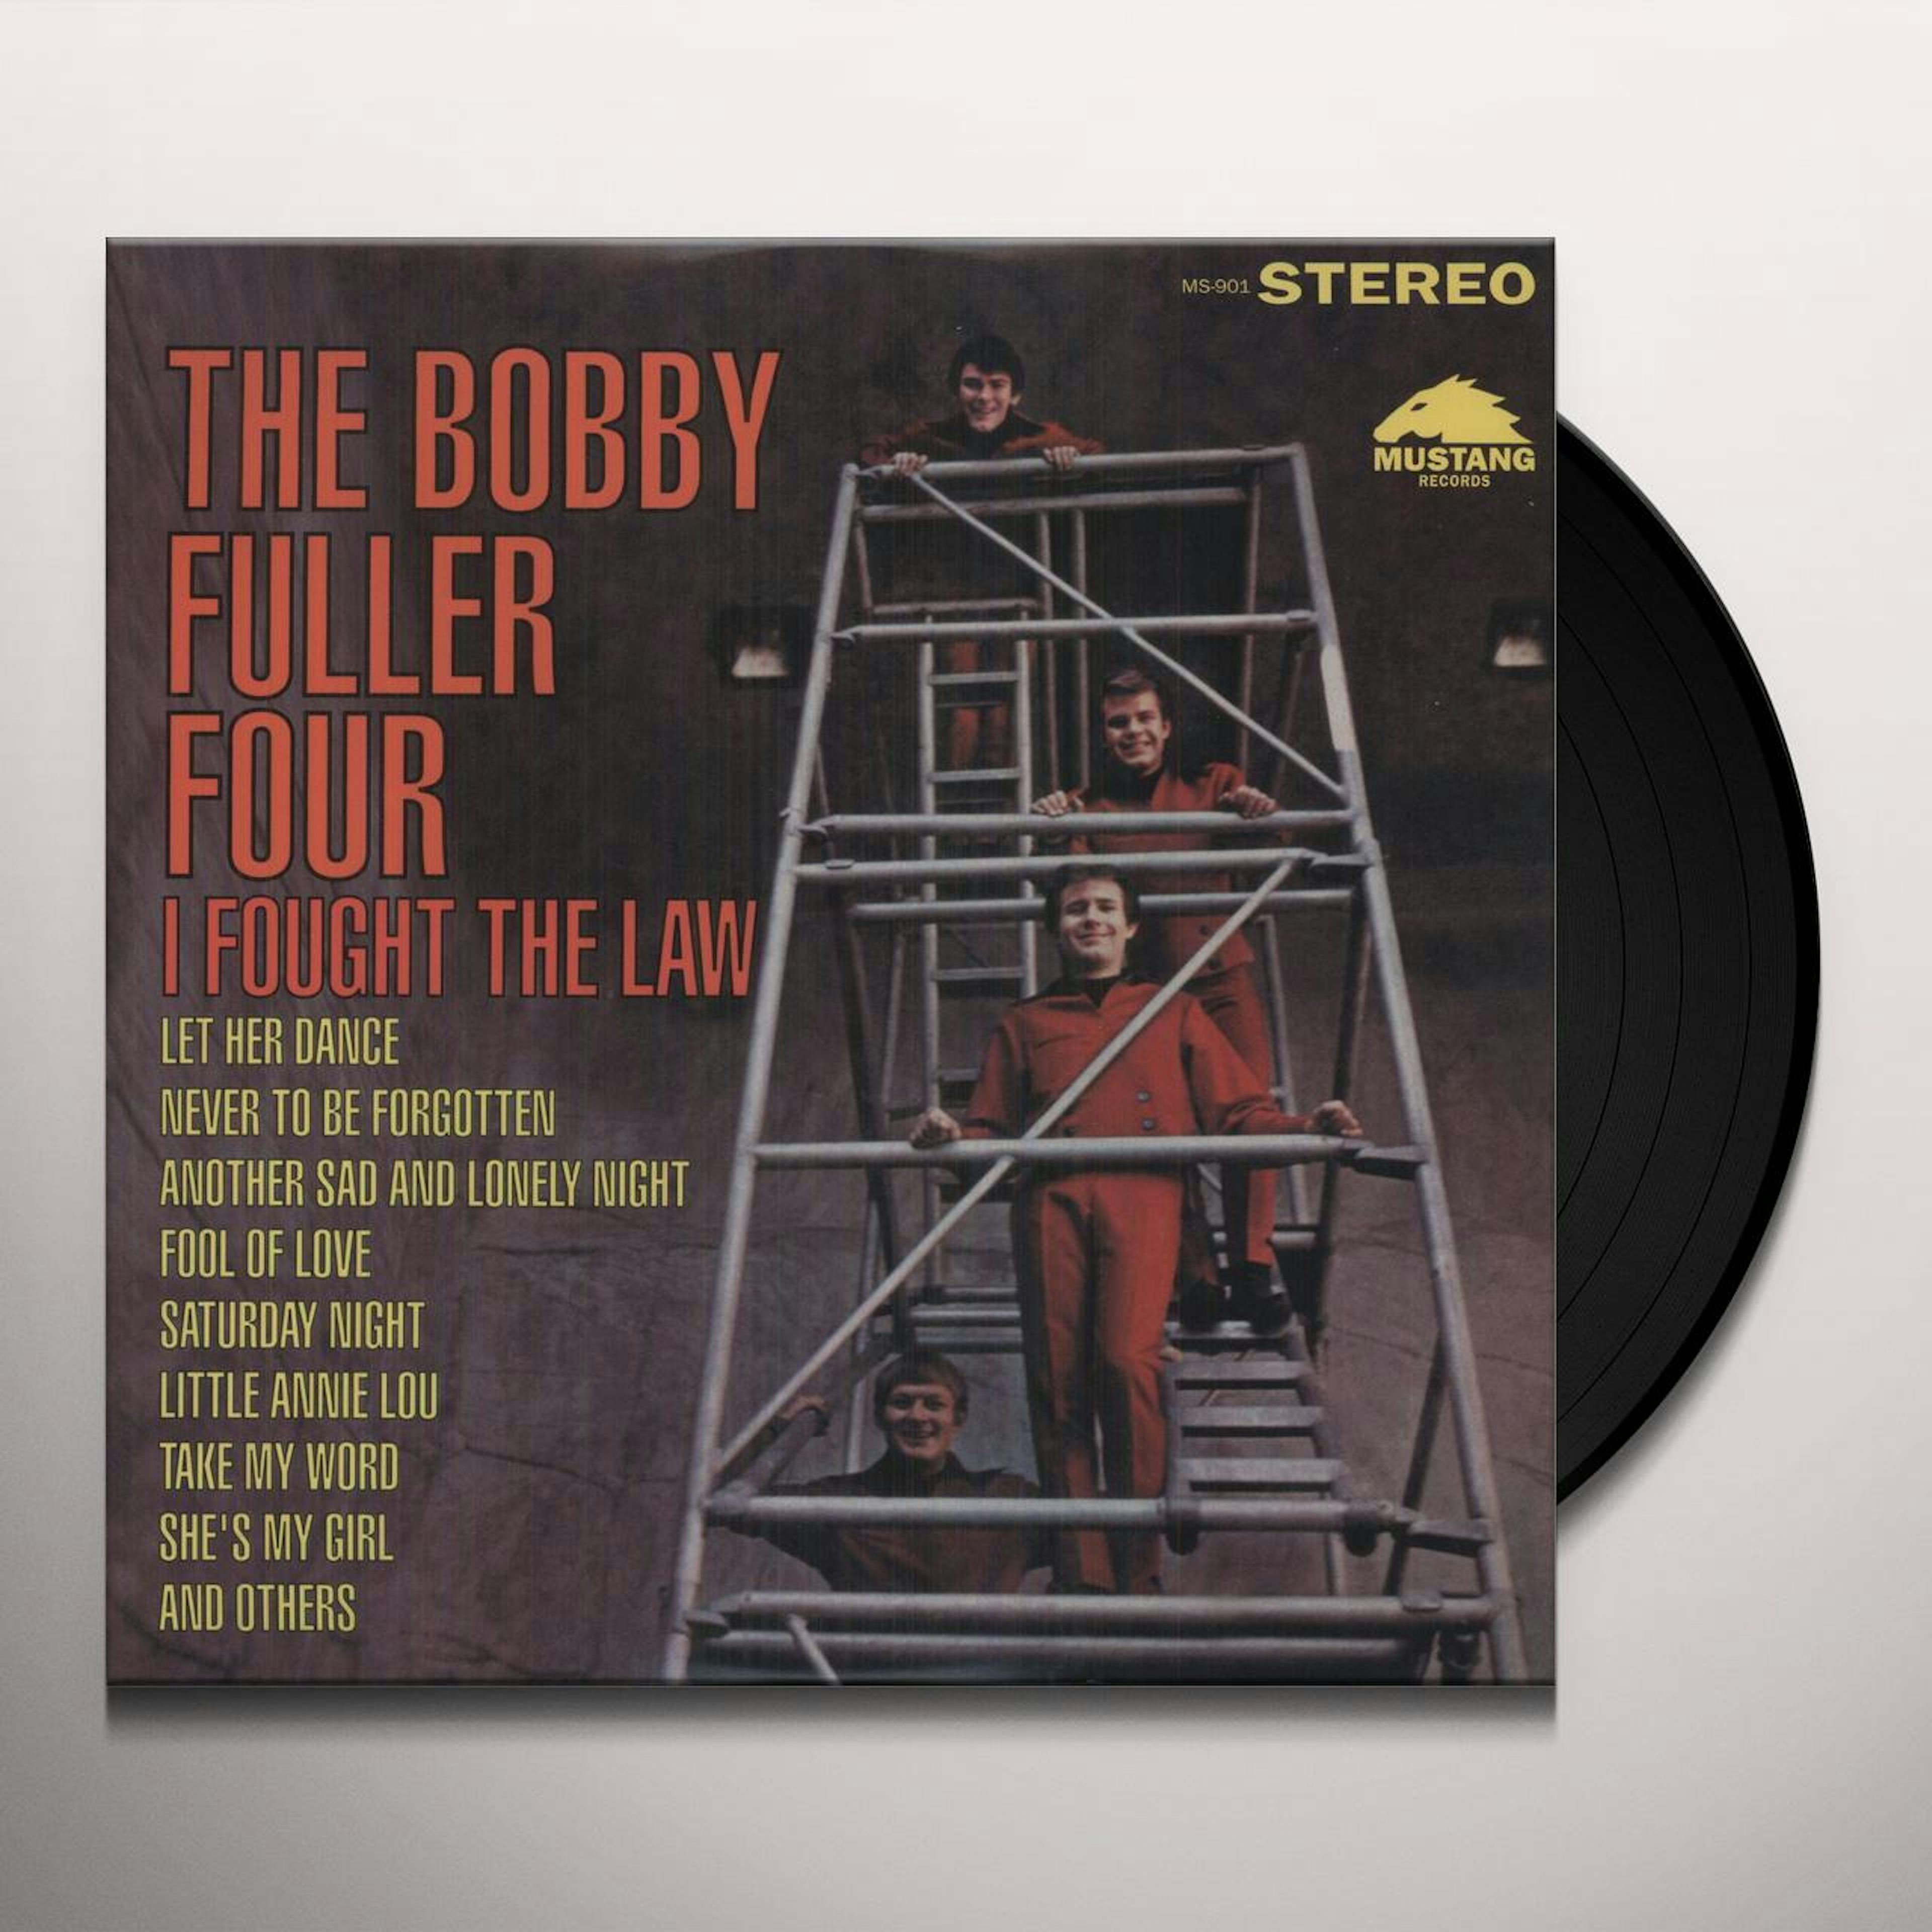 The Bobby Fuller Four I Fought The Law Vinyl Record